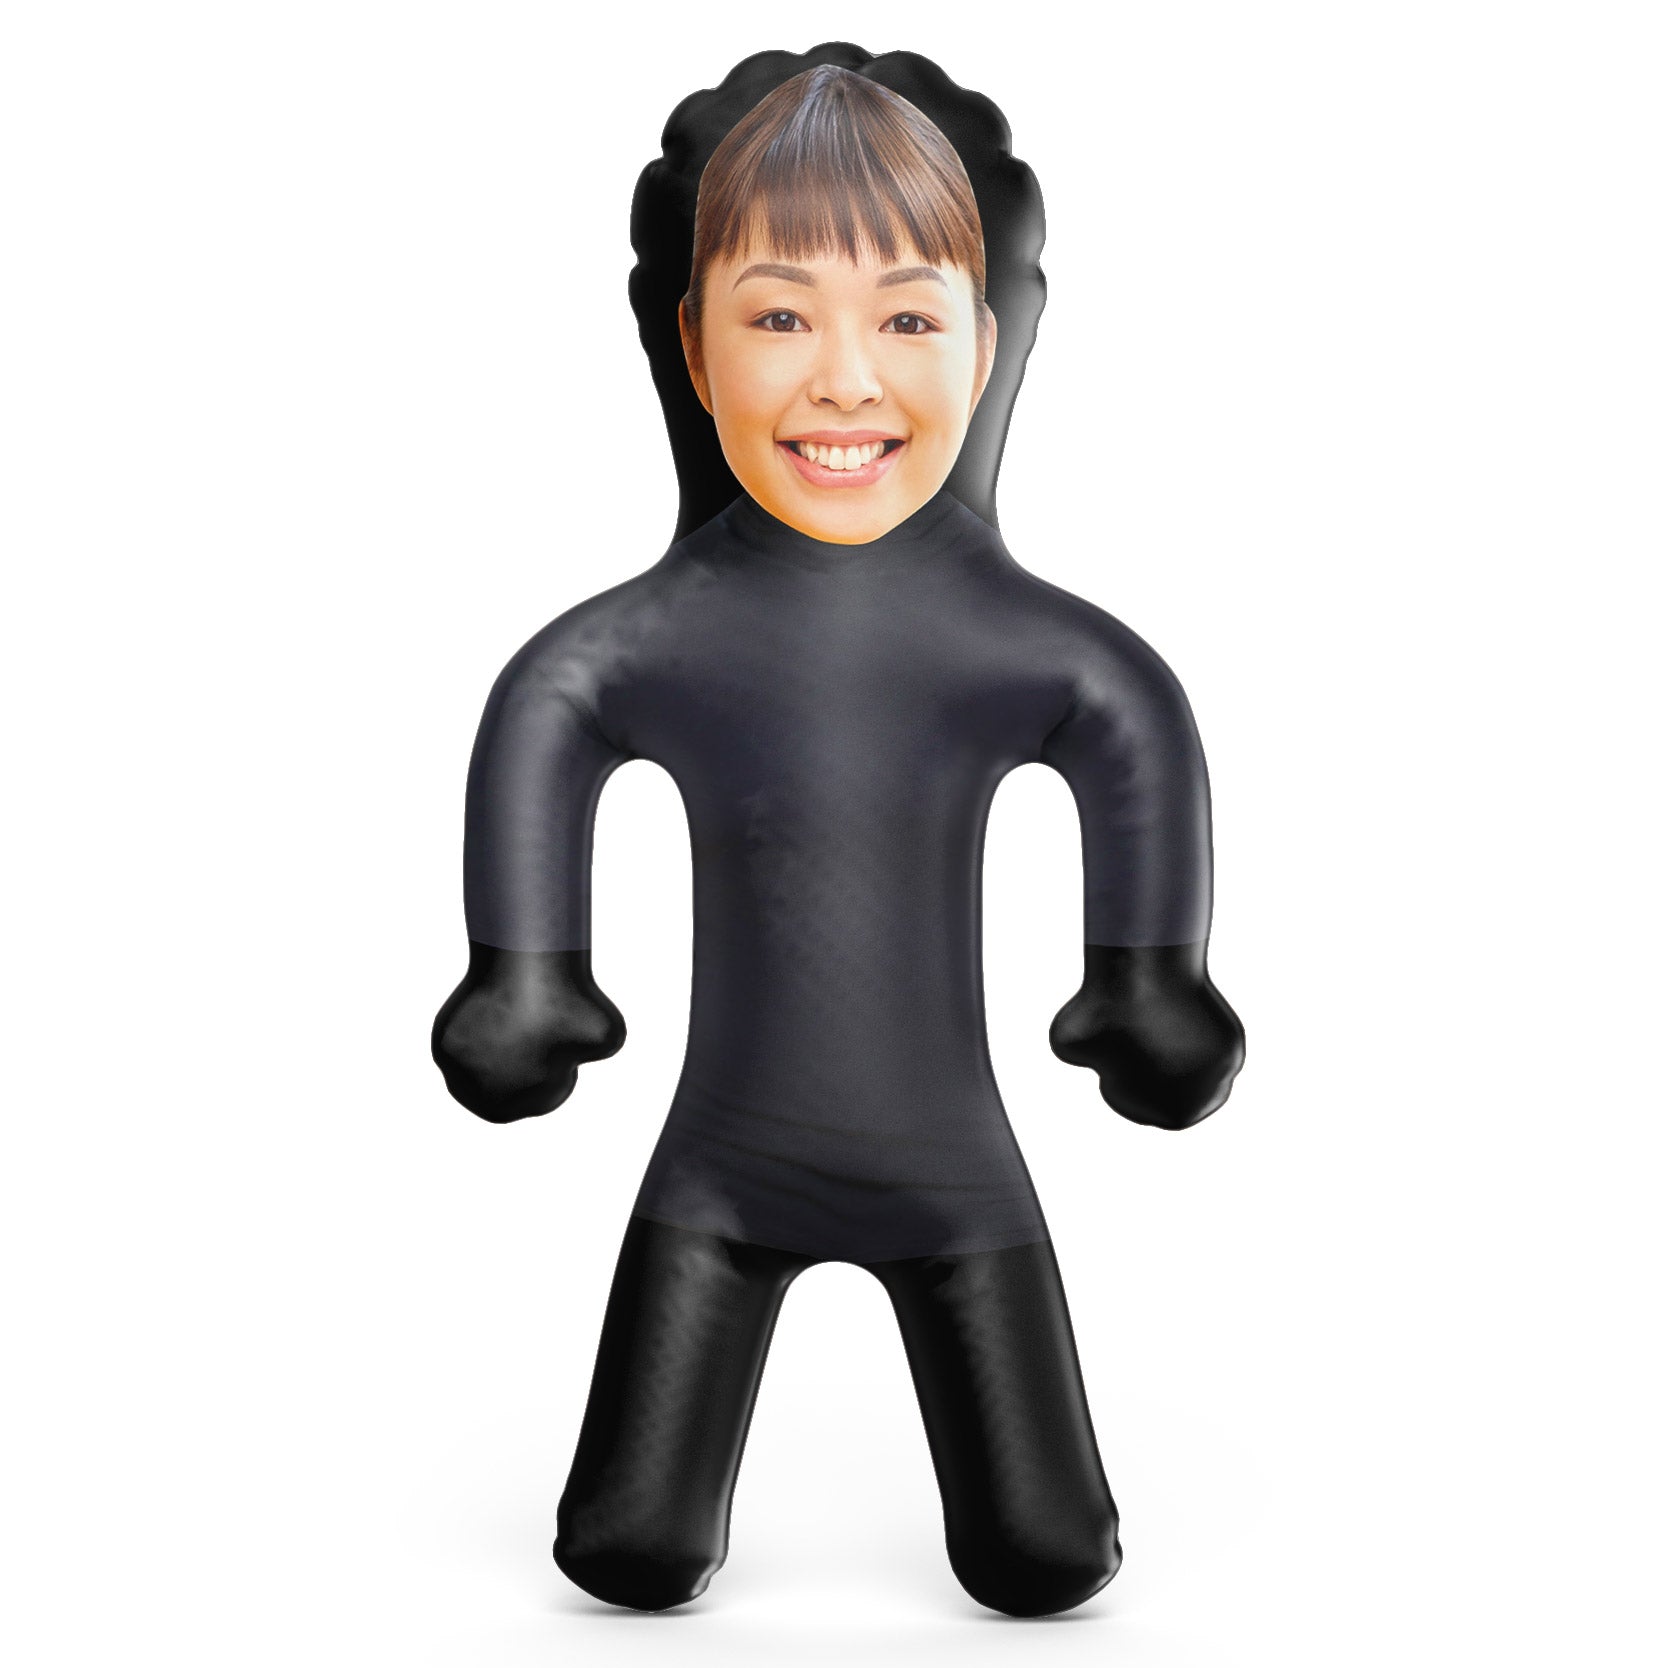 Influencer 4 Inflatable Doll - Influencer Blow Up Doll